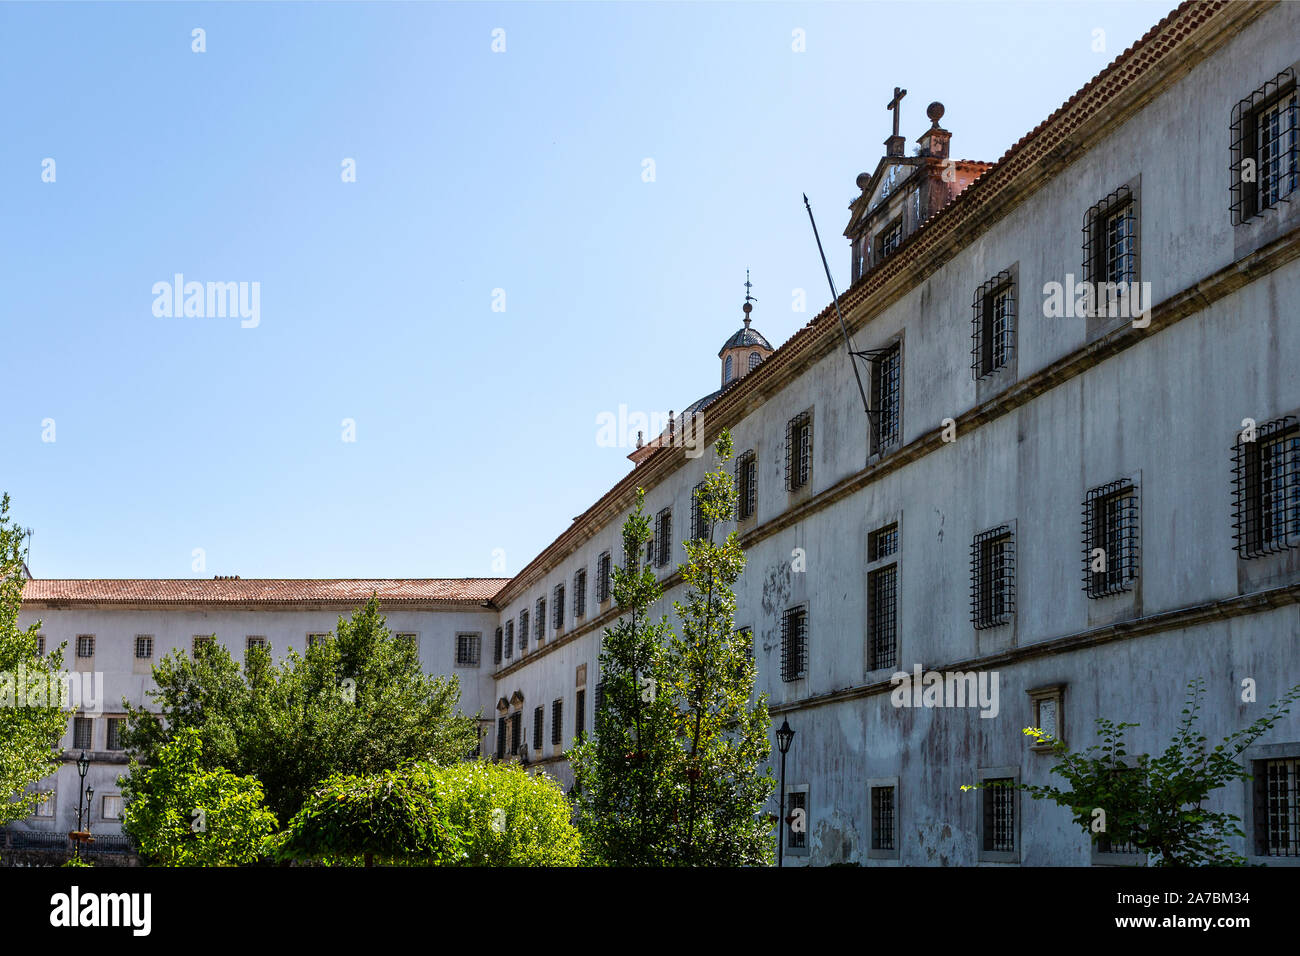 View of the Monastery of Saint Mary main facade, originally built in the 9th century and greatly renovated since the 12th century, in Lorvao, Coimbra, Stock Photo